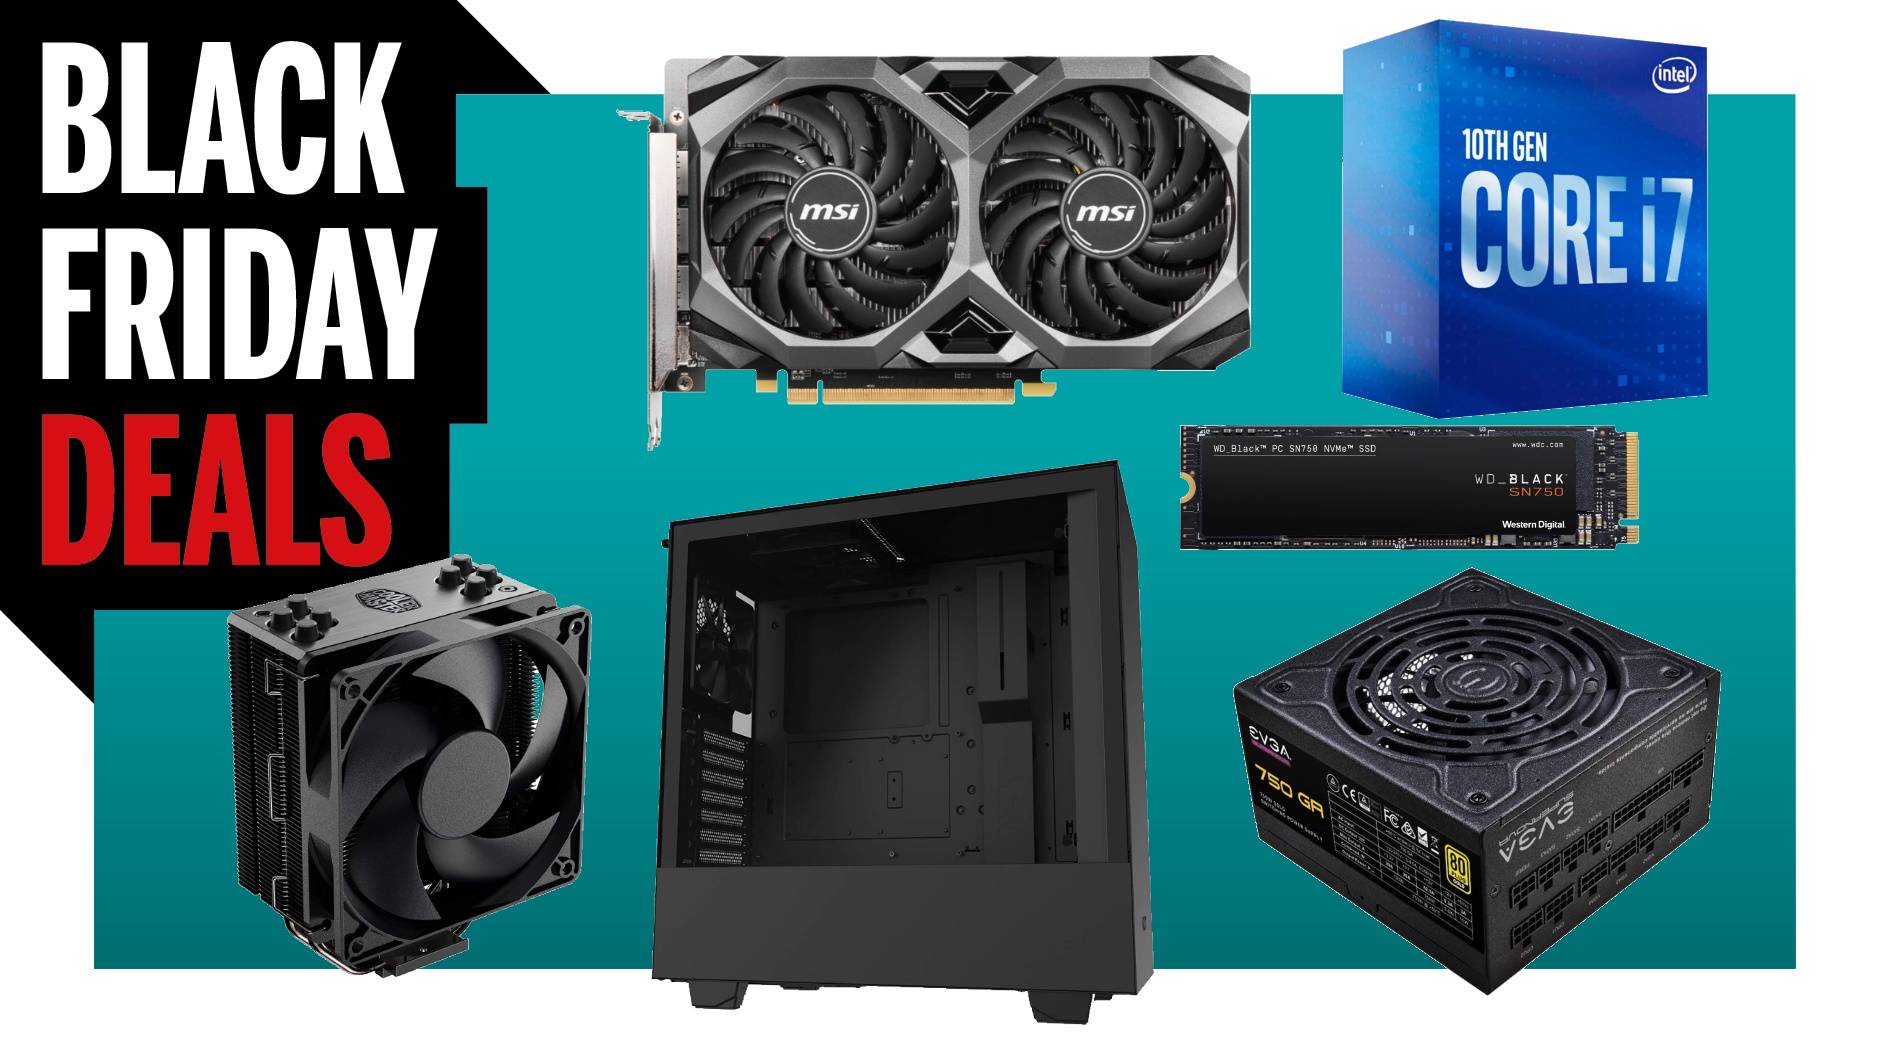  If it wasn't for the GPU drought we could build a great Black Friday gaming PC from deals alone 